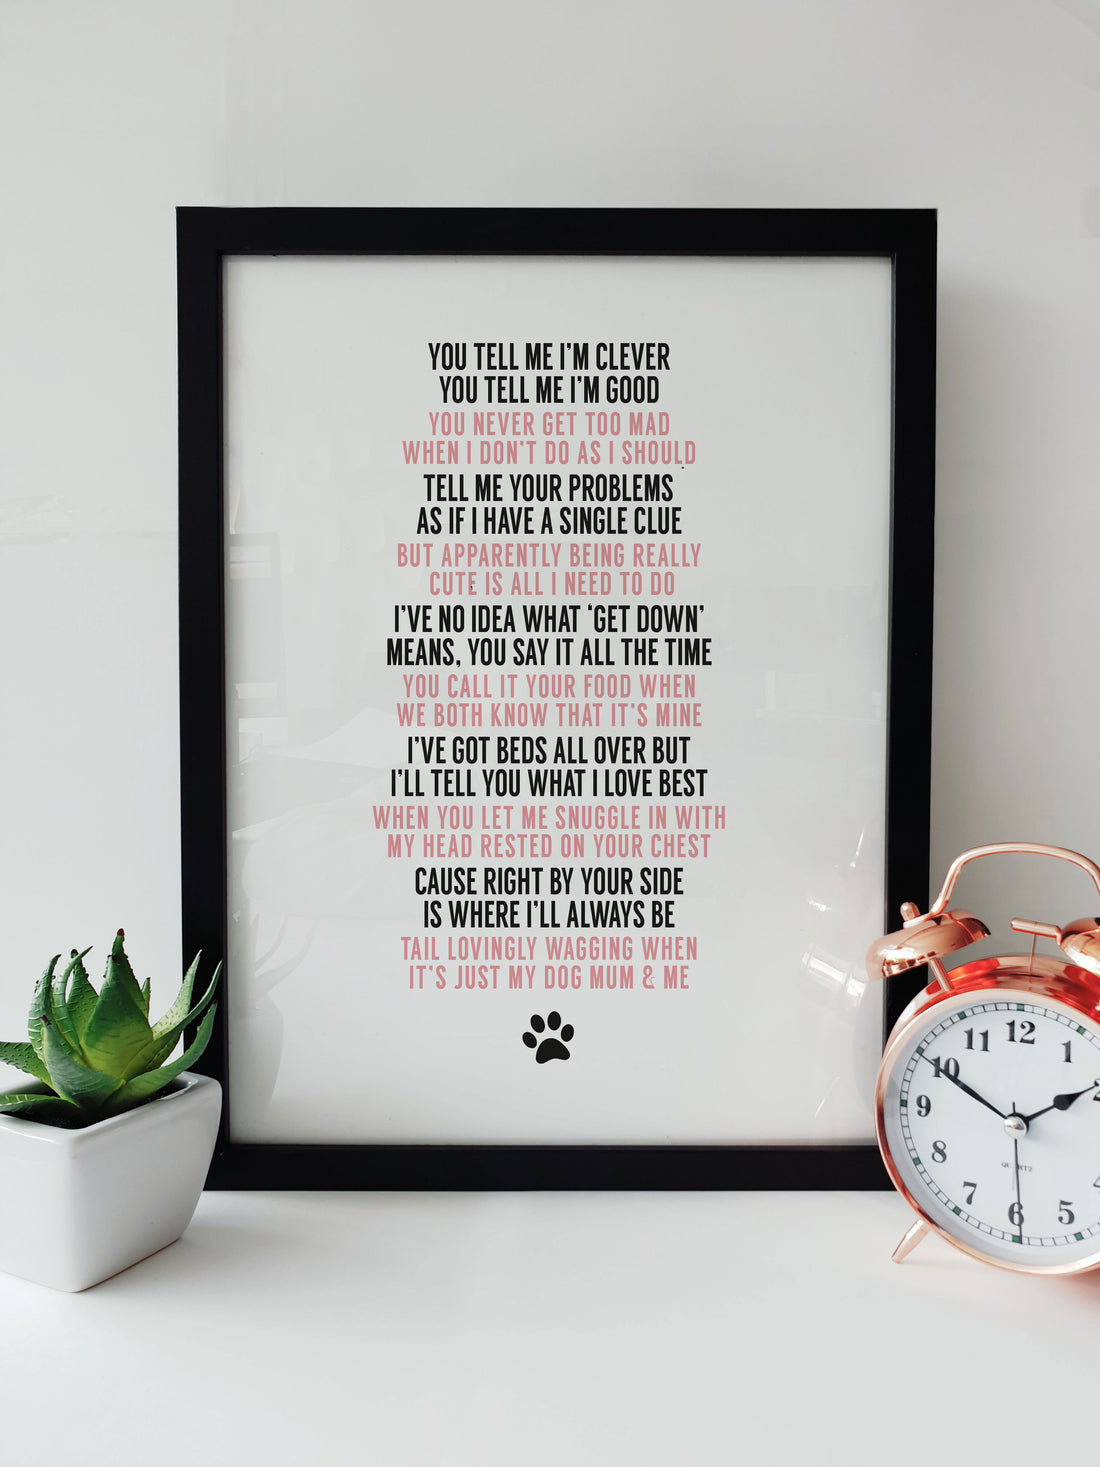 Dog Mum Poem A4 Print by Local Lingo, celebrating the love between a pet mum and her dog with a heartfelt poem.